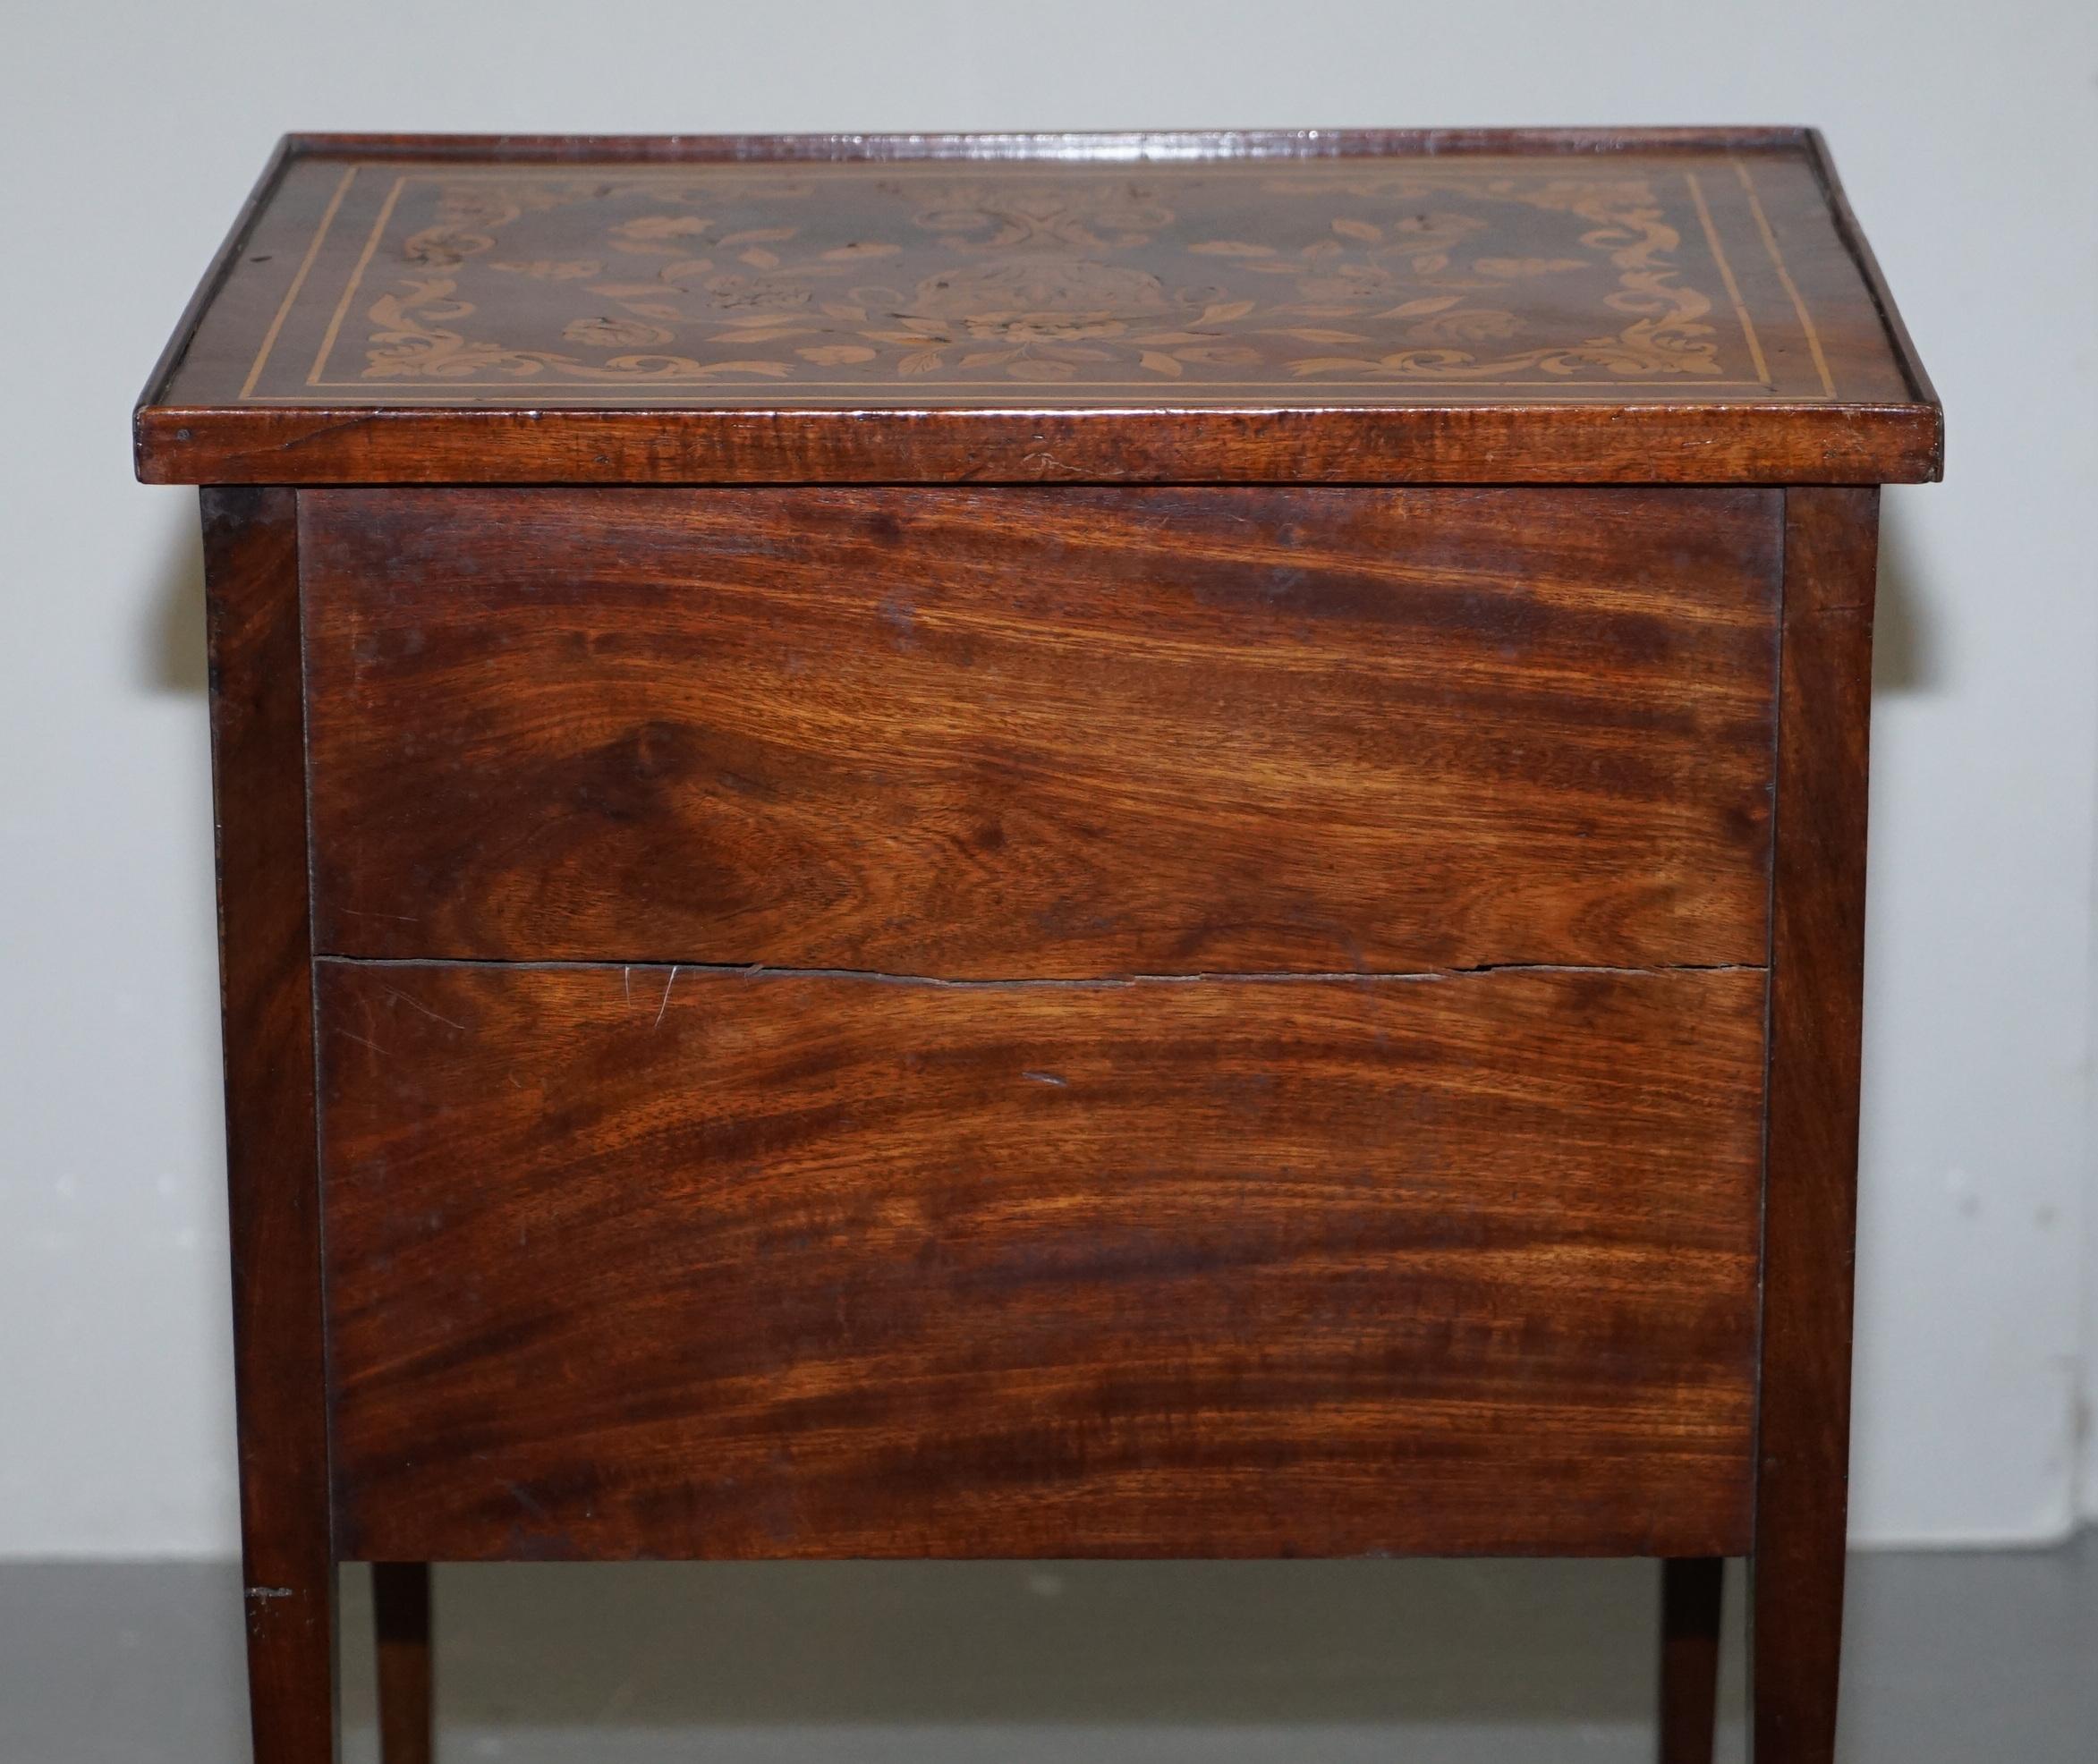 Rare 19th Century Dutch Marquetry Inlaid Side Table with Tambour Fronted Door For Sale 8